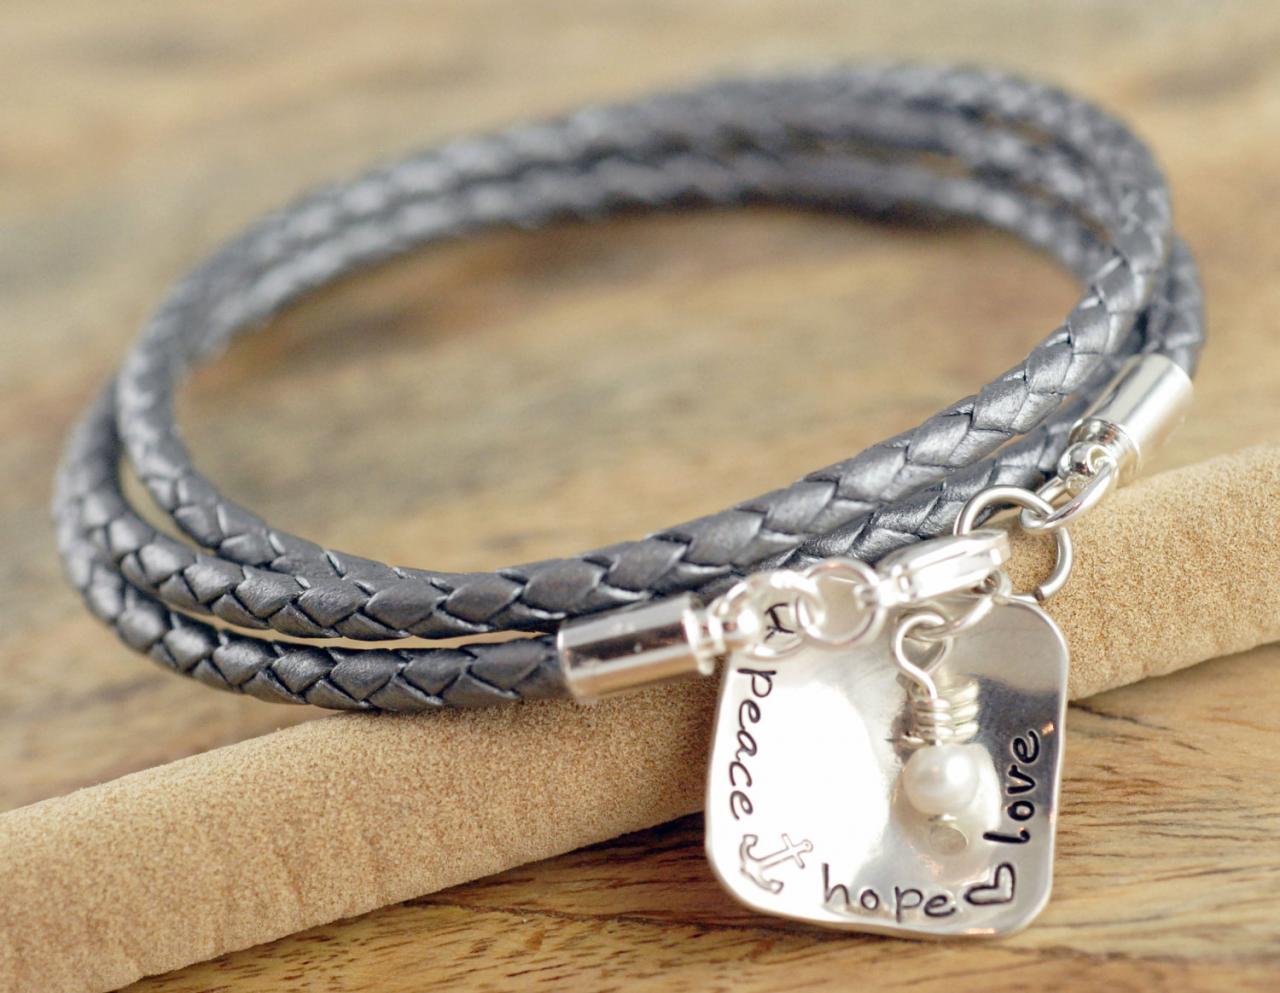 Personalized Bracelet - Hand Stamped Bracelet - Leather Bracelet - Name Charm Bracelet - Mom Bracelet - Mothers Jewelry - Gift for Her